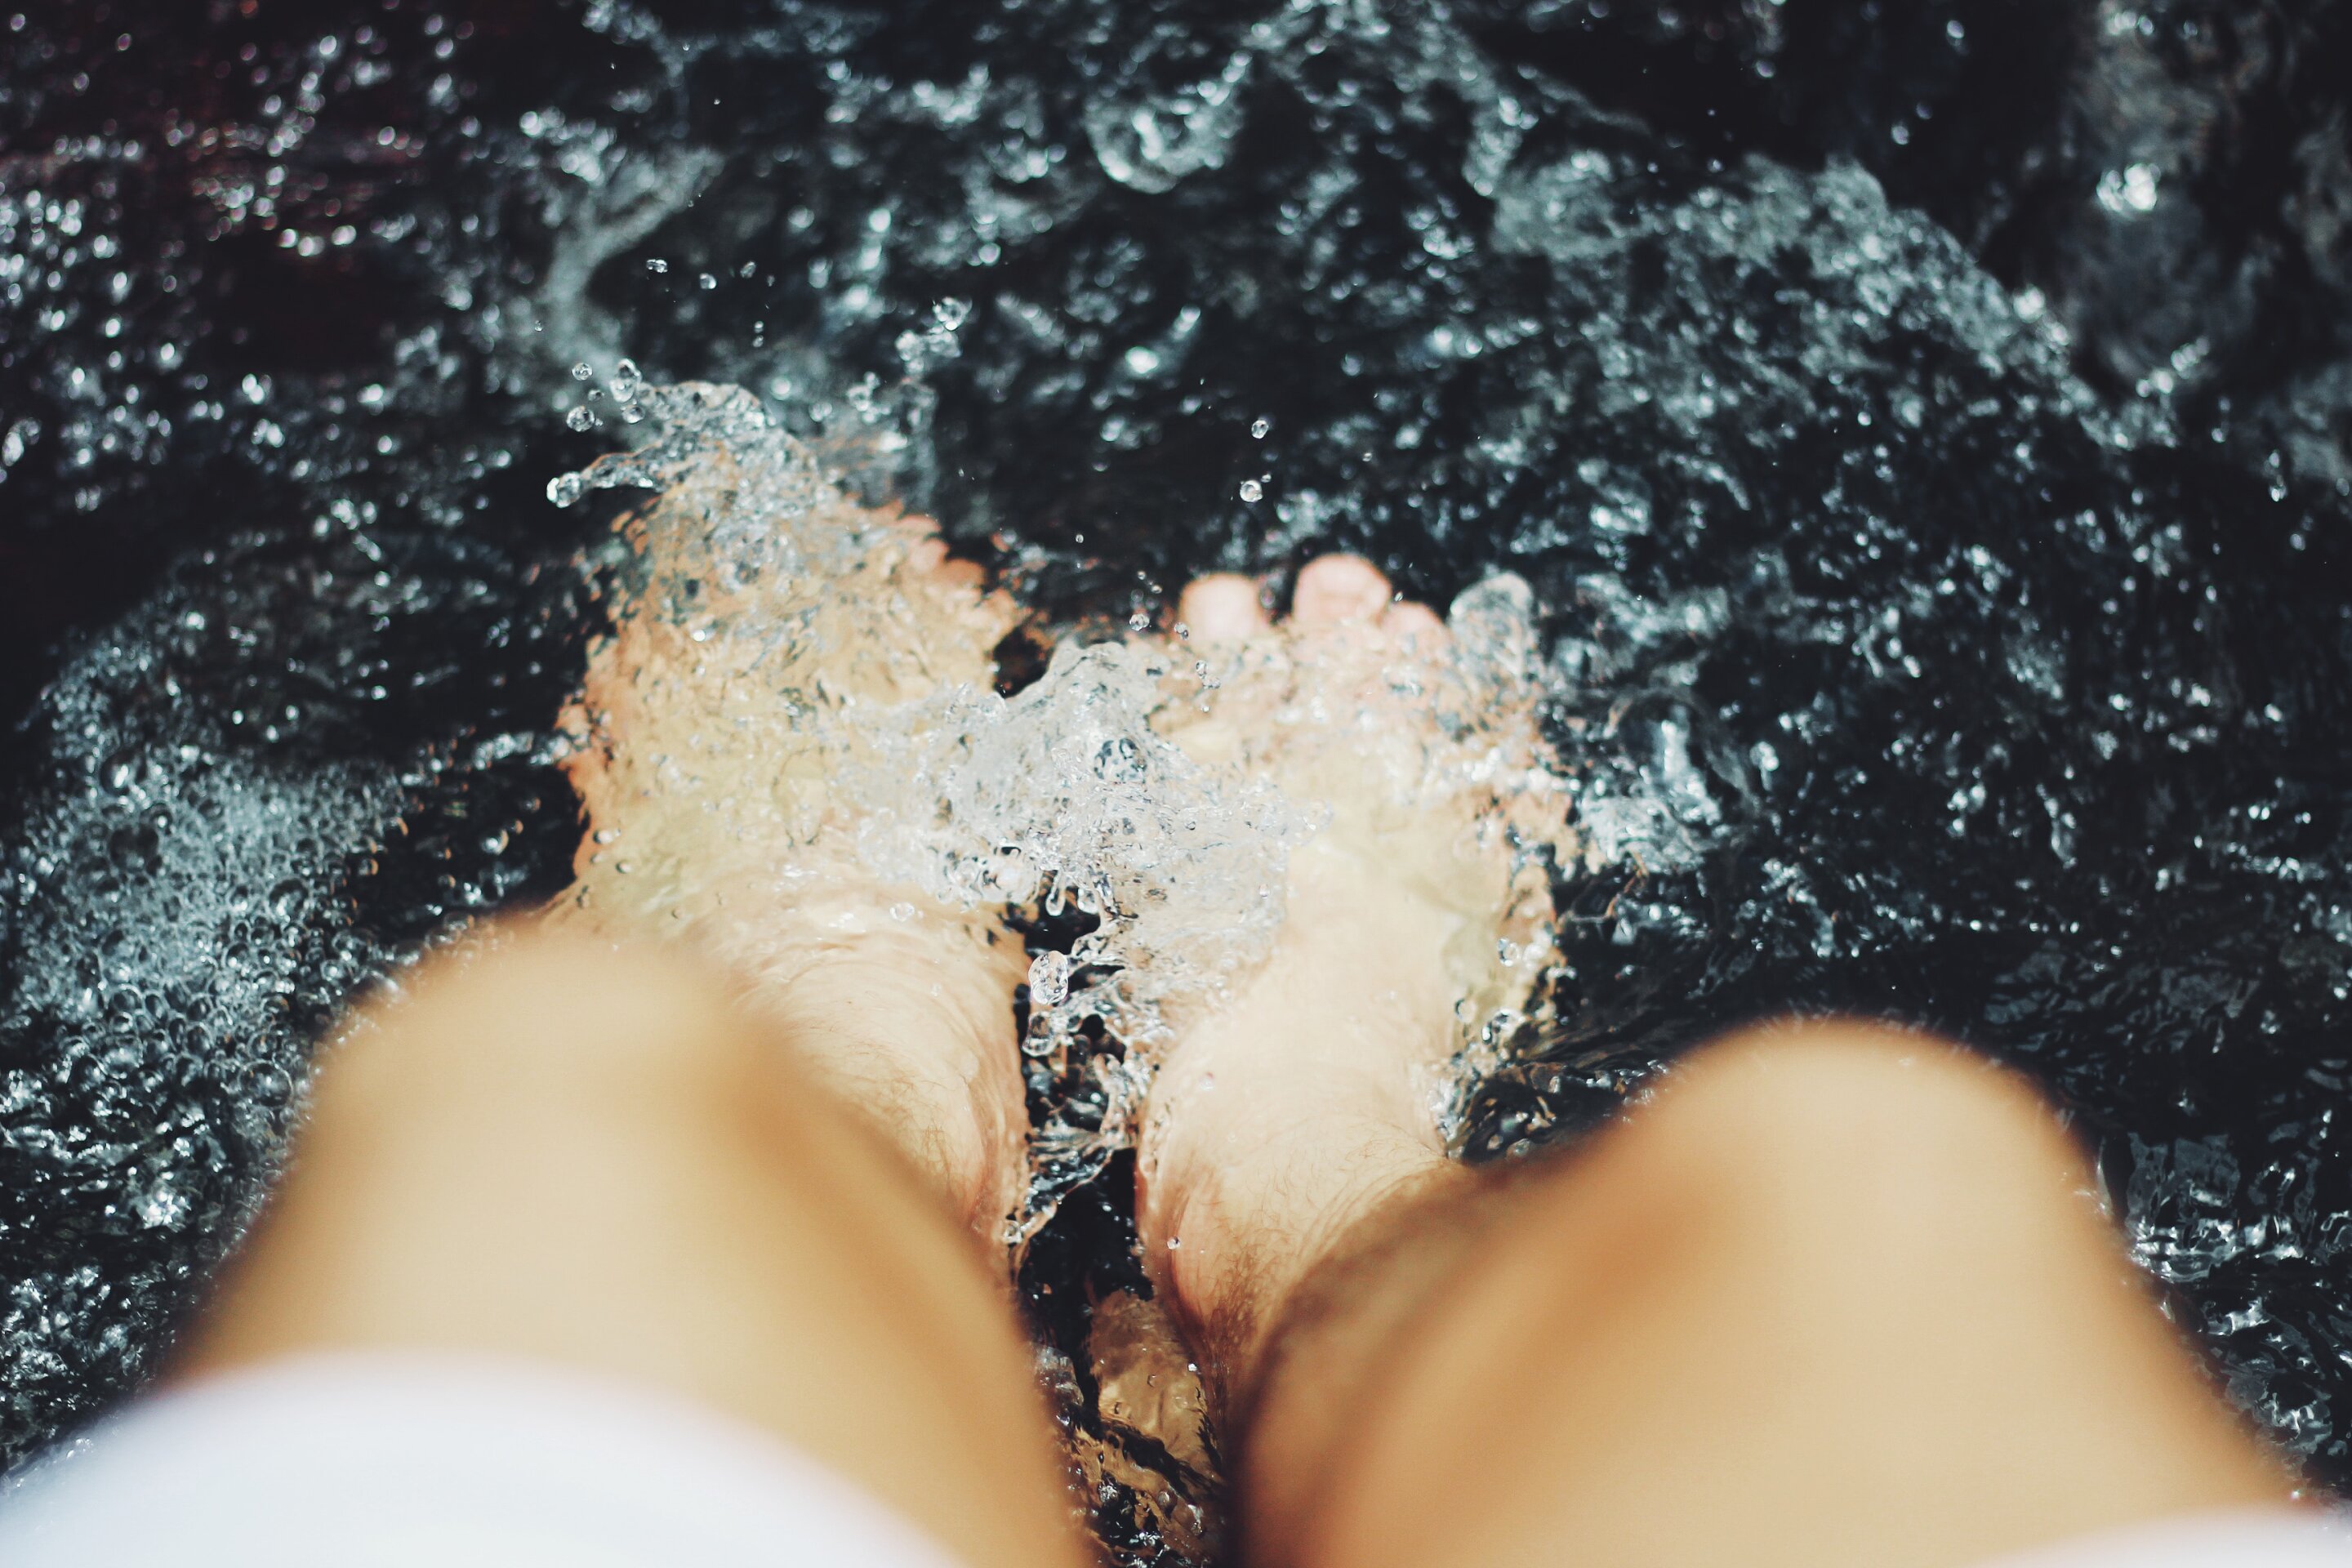 Cool Fad: Why Ice Baths Are Getting Popular - Forbes Africa